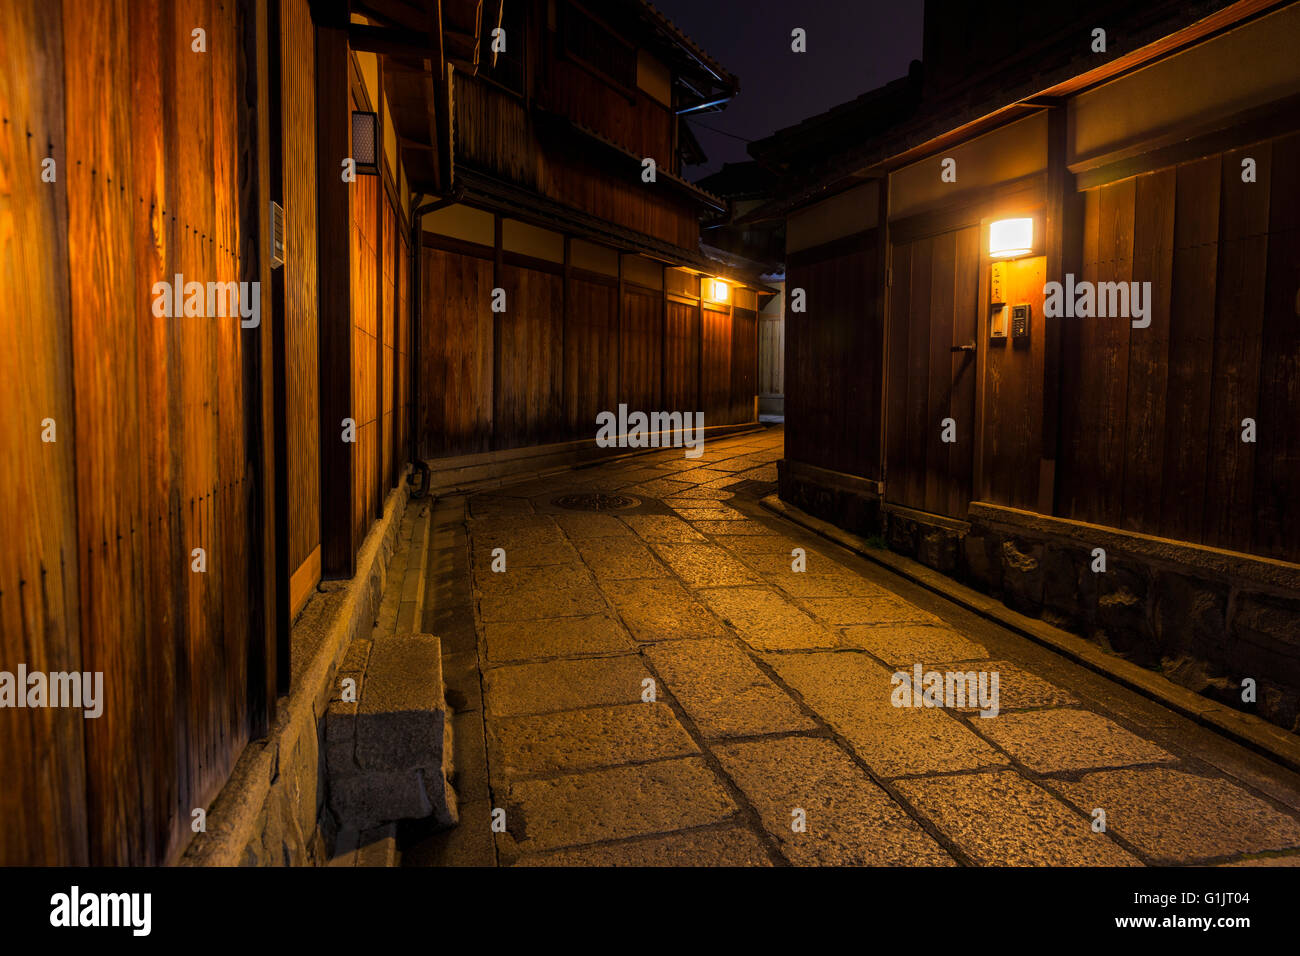 An old town in Kyoto, Japan by night. Stock Photo